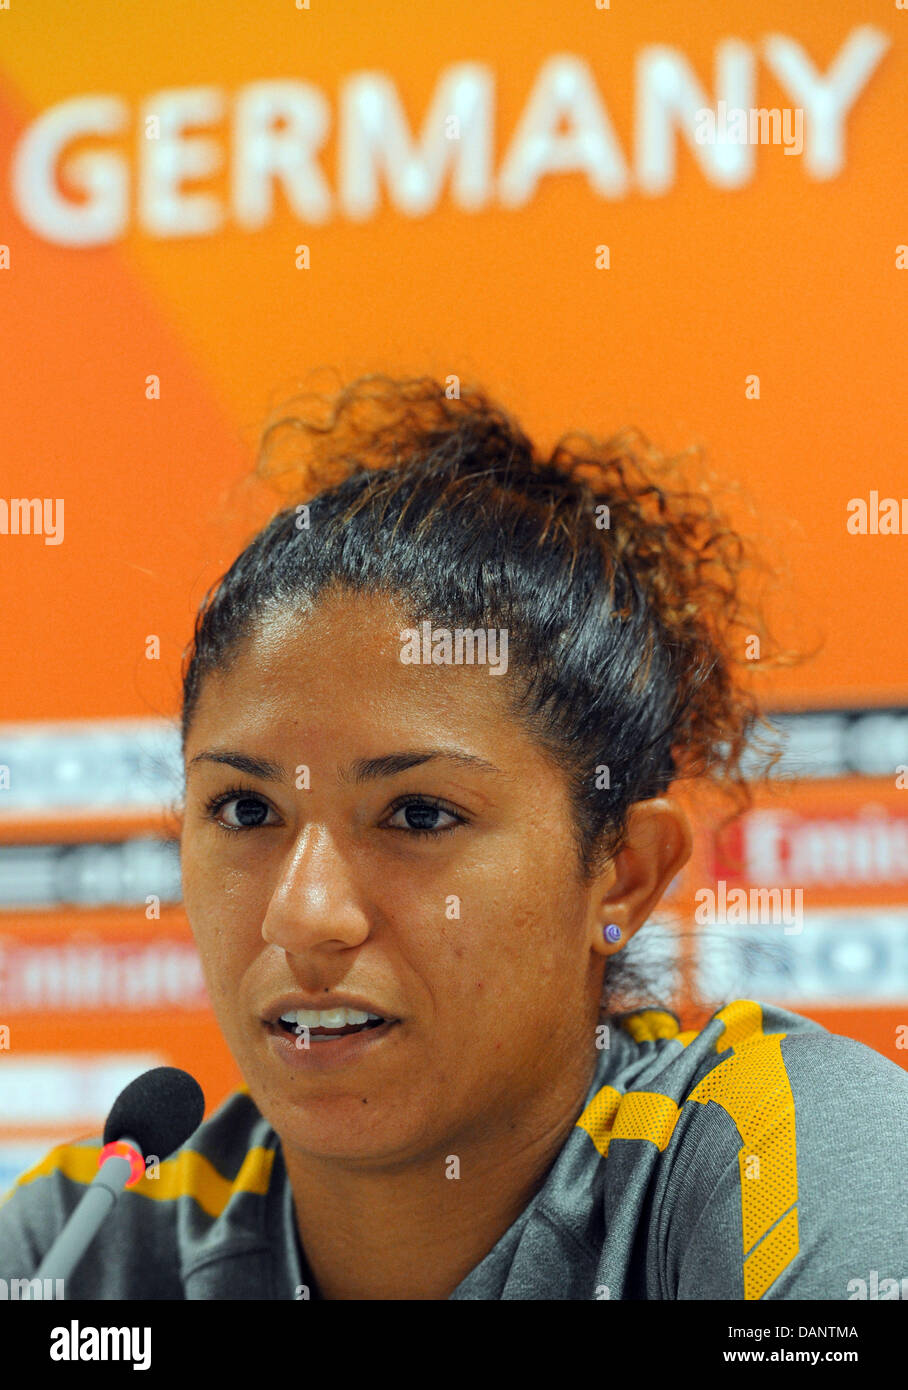 Cristiane of Brazil speaks during a press conference of the team in Dresden, Germany, 09 July 2011. Brazil faces the USA in the quarter-final match of the FIFA Women's World Cup in Dresden on 10 July 2011. Foto: Thomas Eisenhuth dpa  +++(c) dpa - Bildfunk+++ Stock Photo